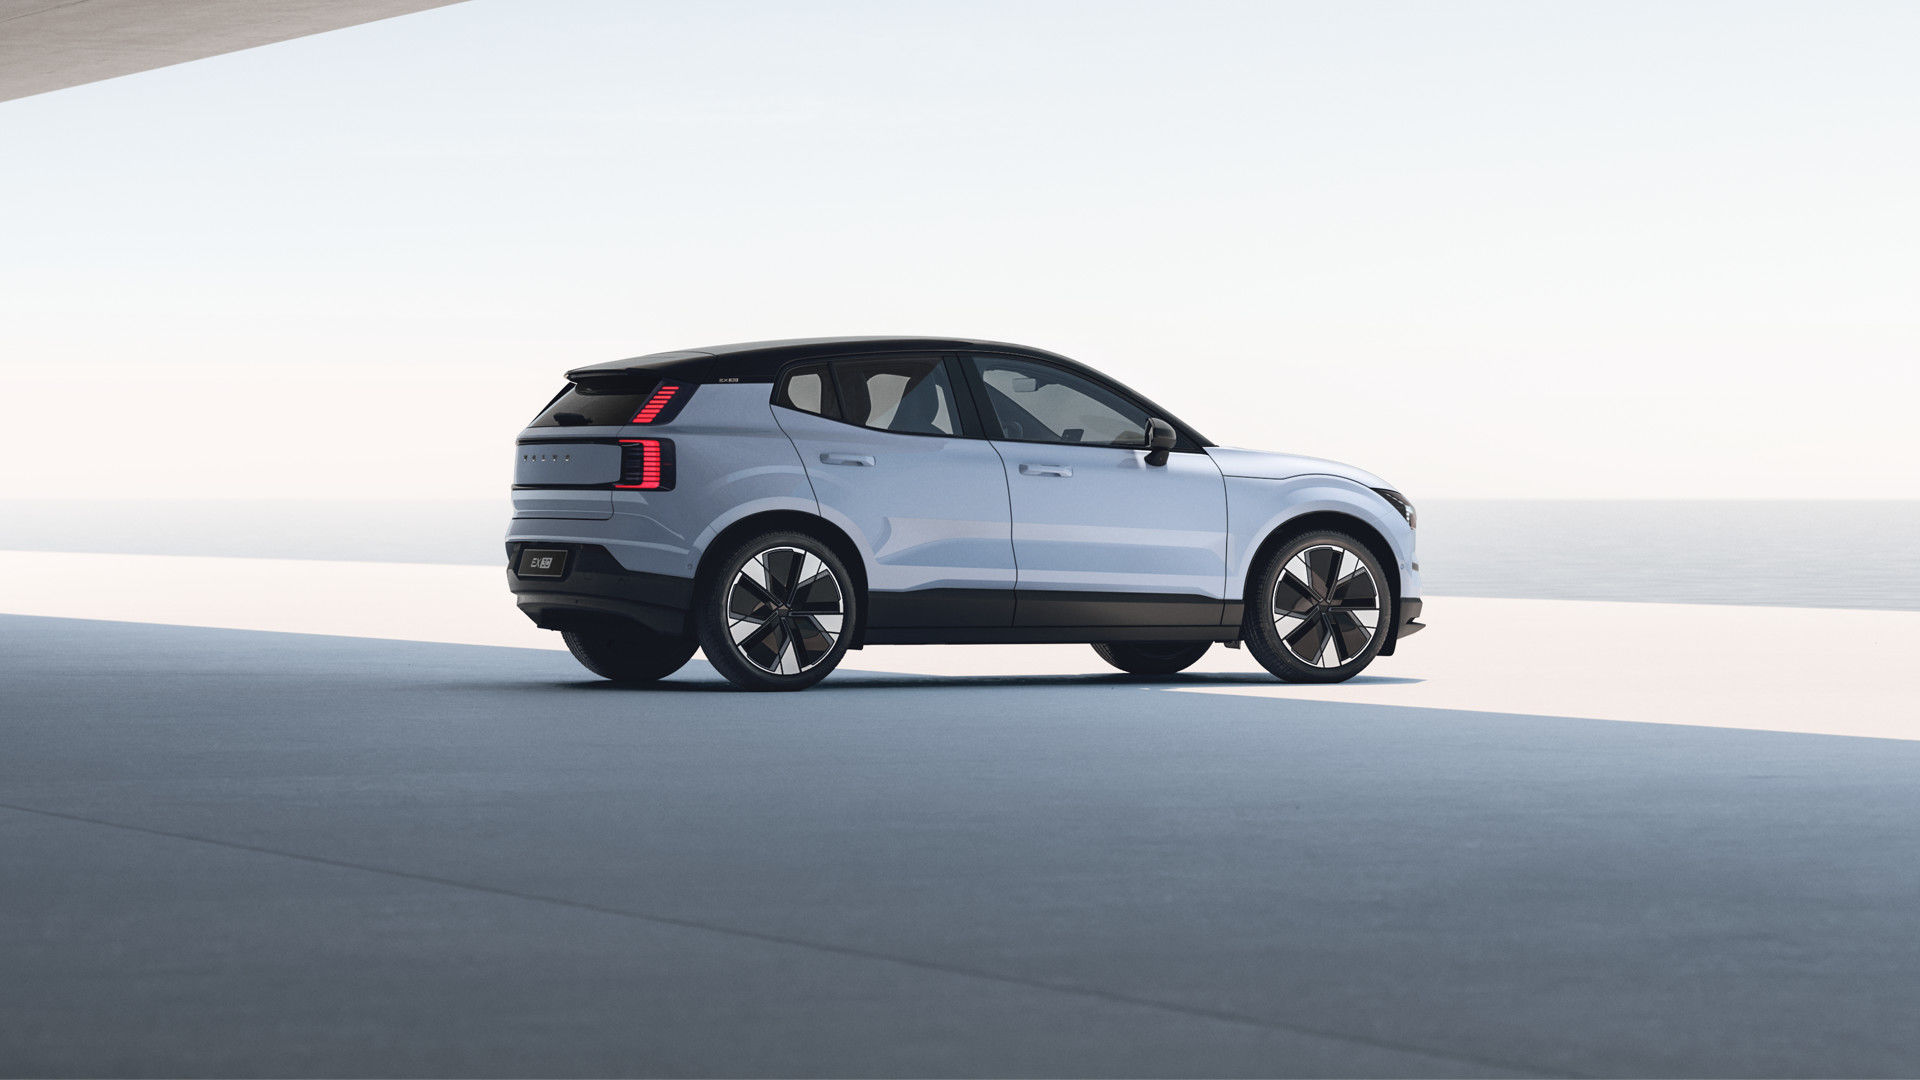 Sign me up for latest news about the Volvo EX30.